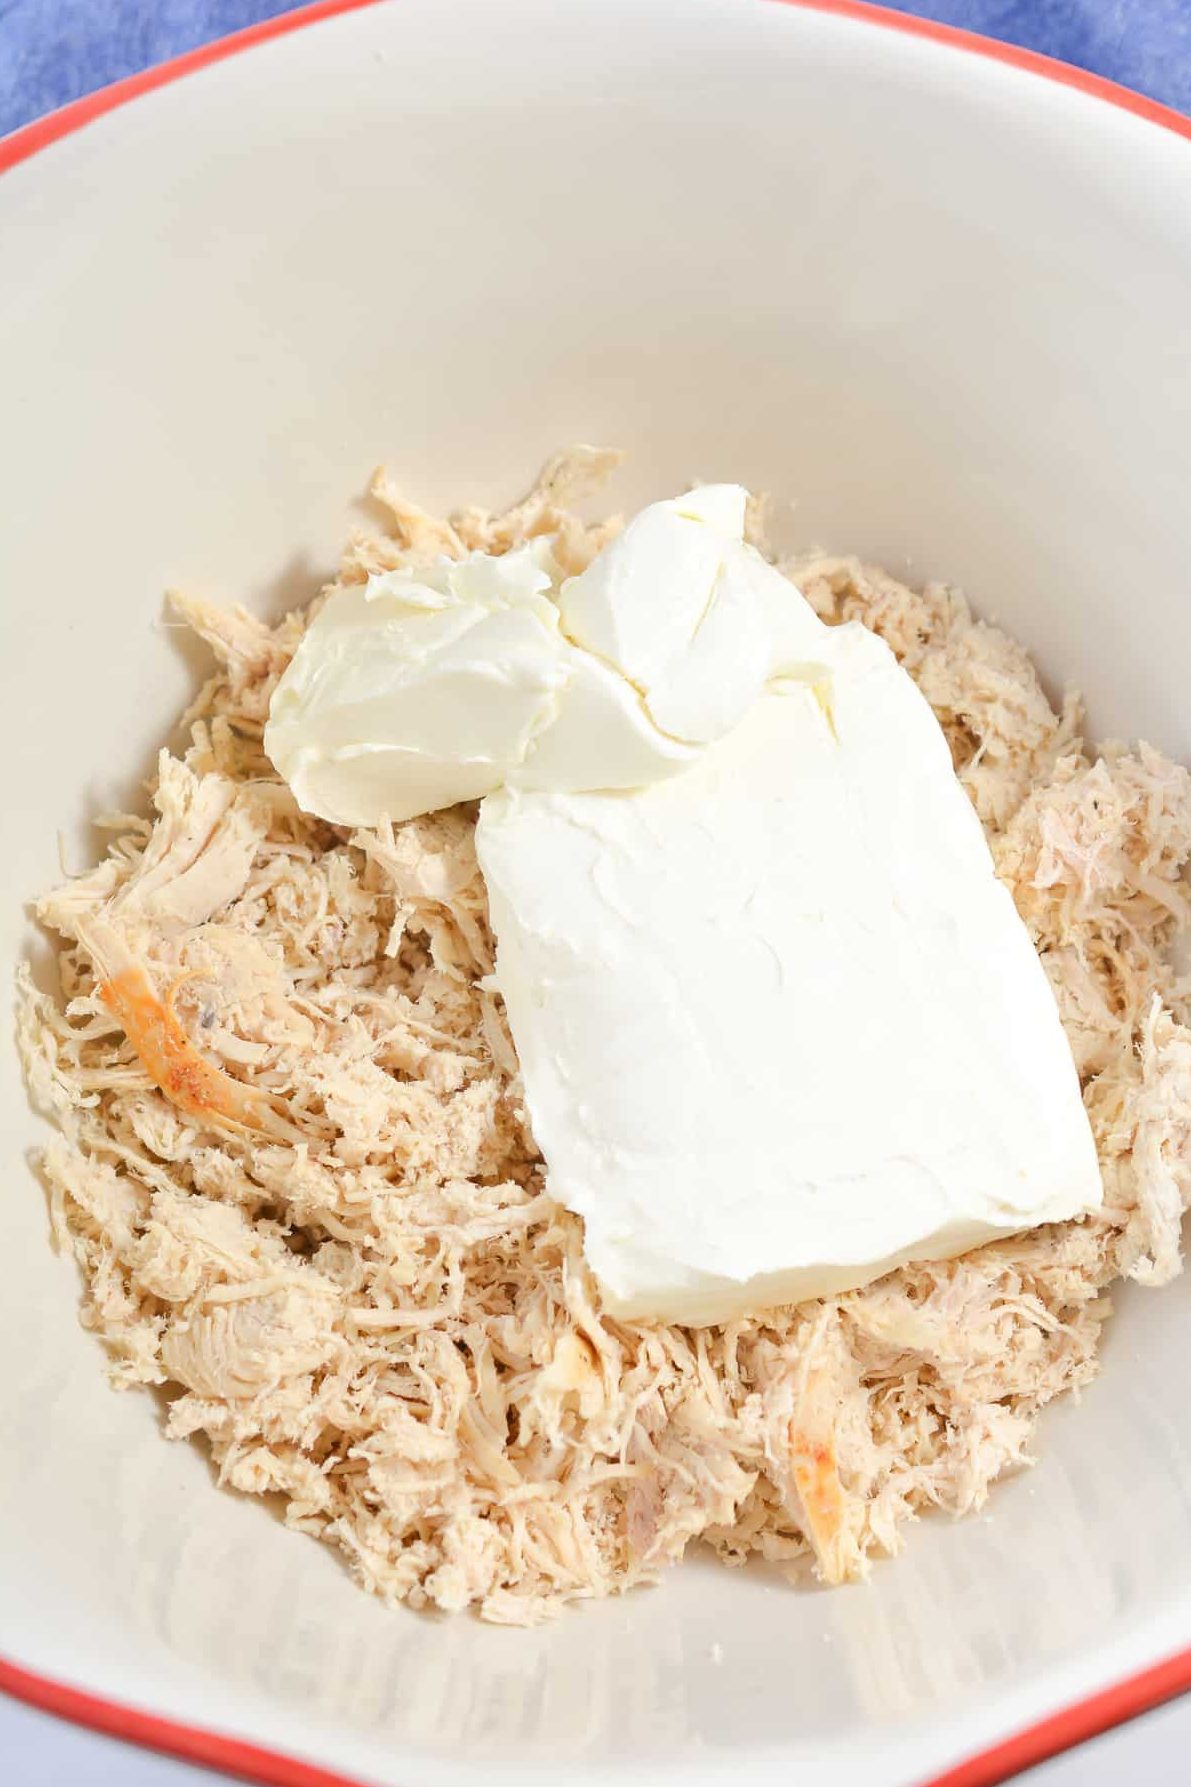 In a large mixing bowl, combine the chicken and cream cheese.